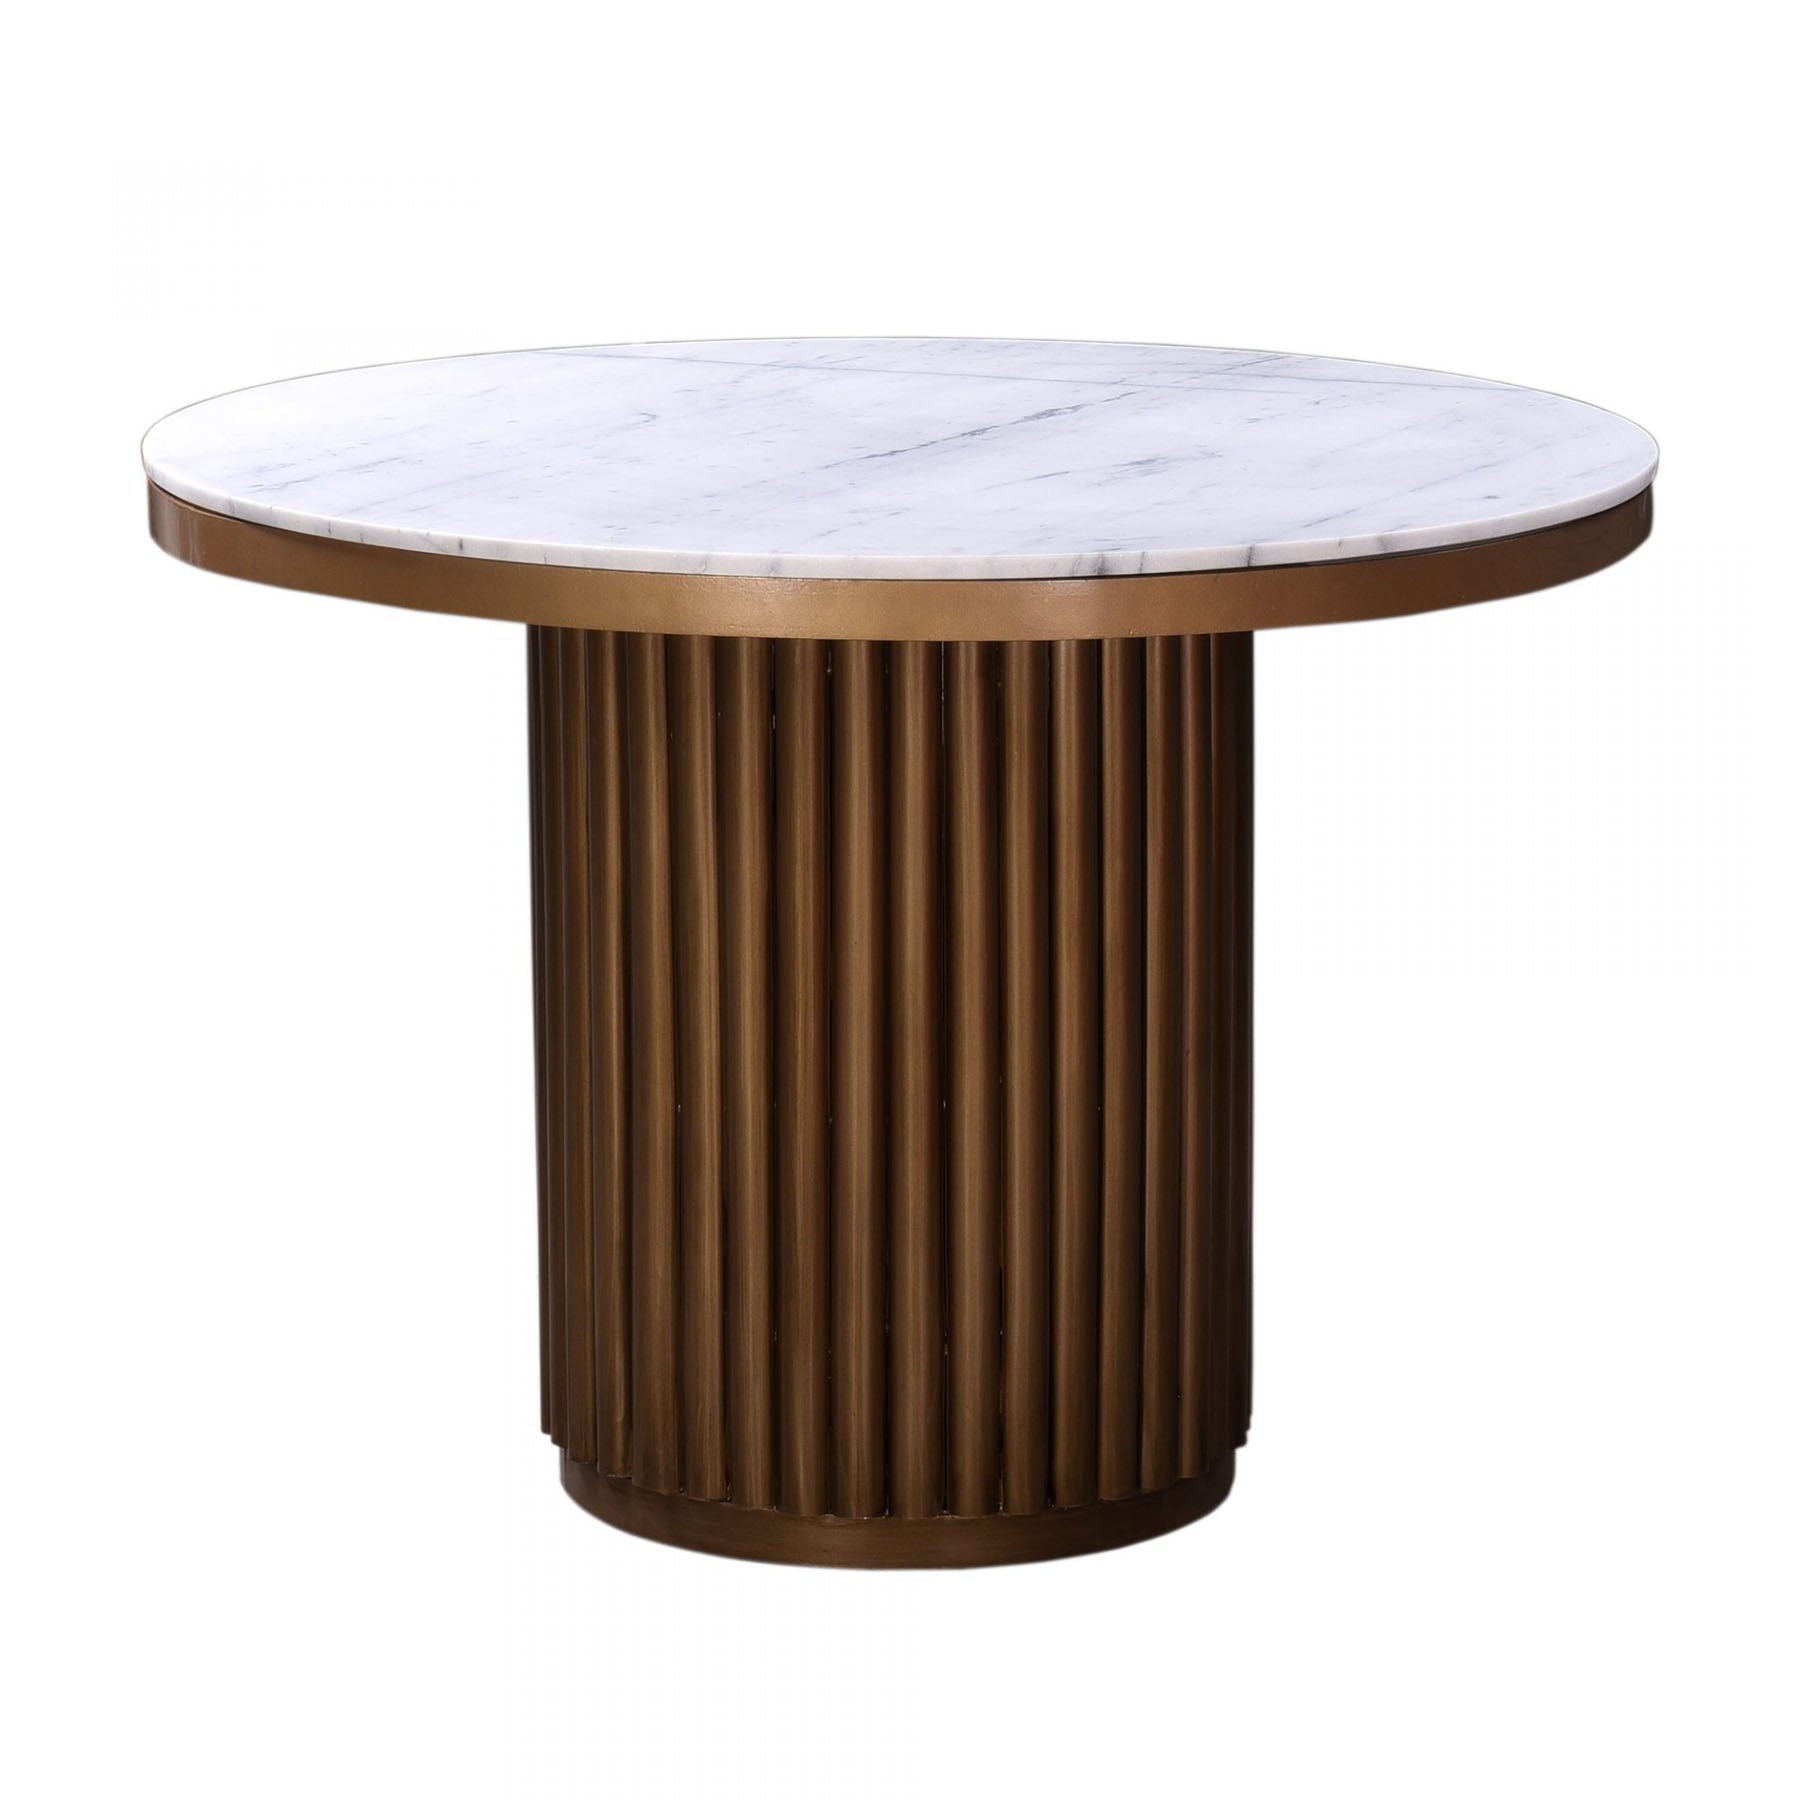 Modern contemporary marble top dining table